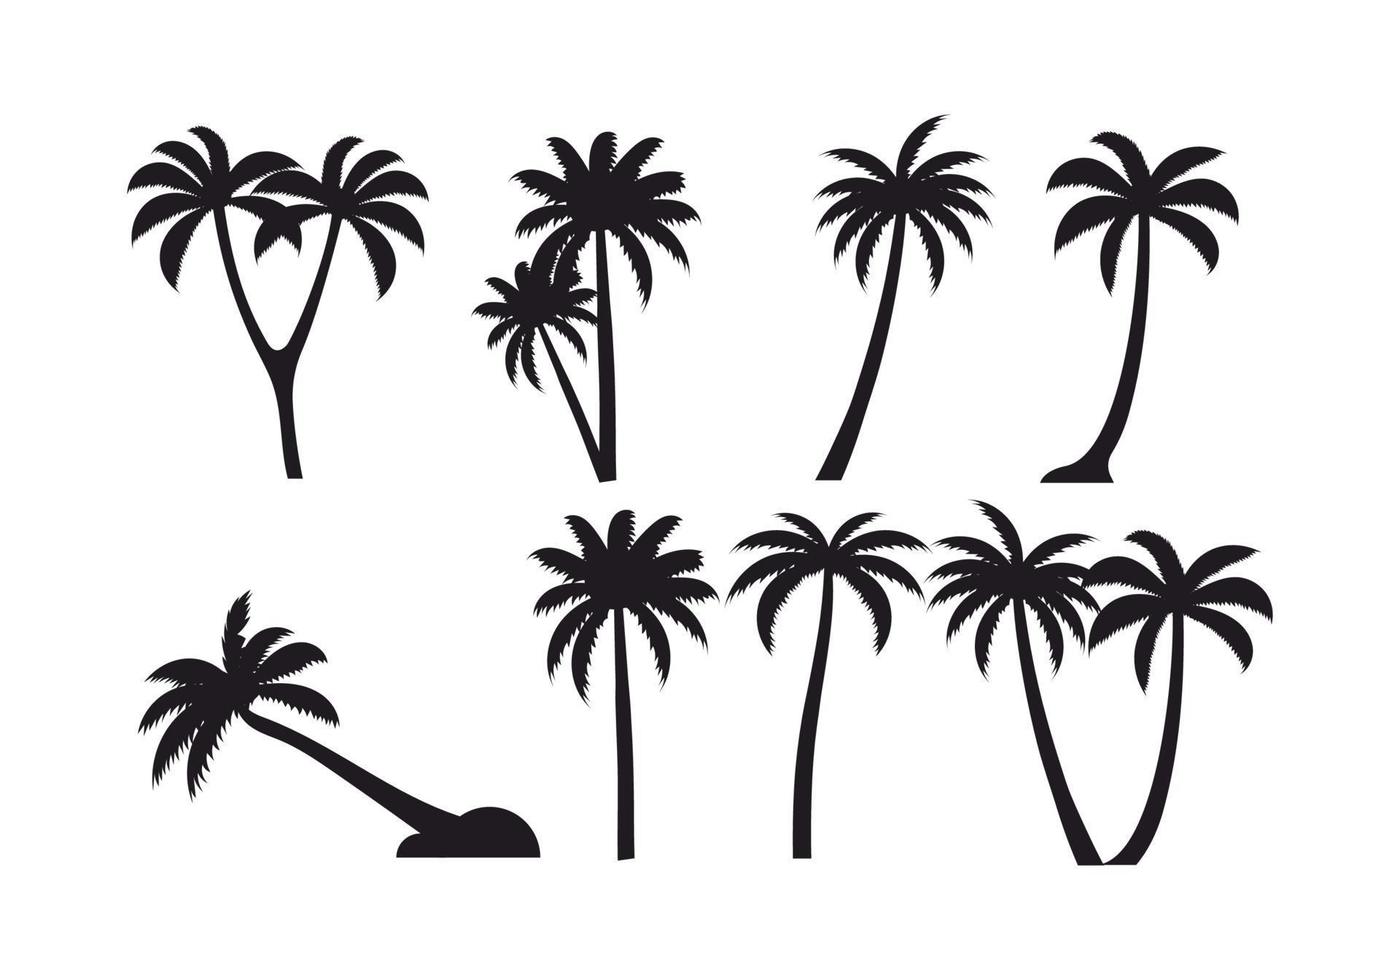 various coconut palm silhouettes on the with background vector